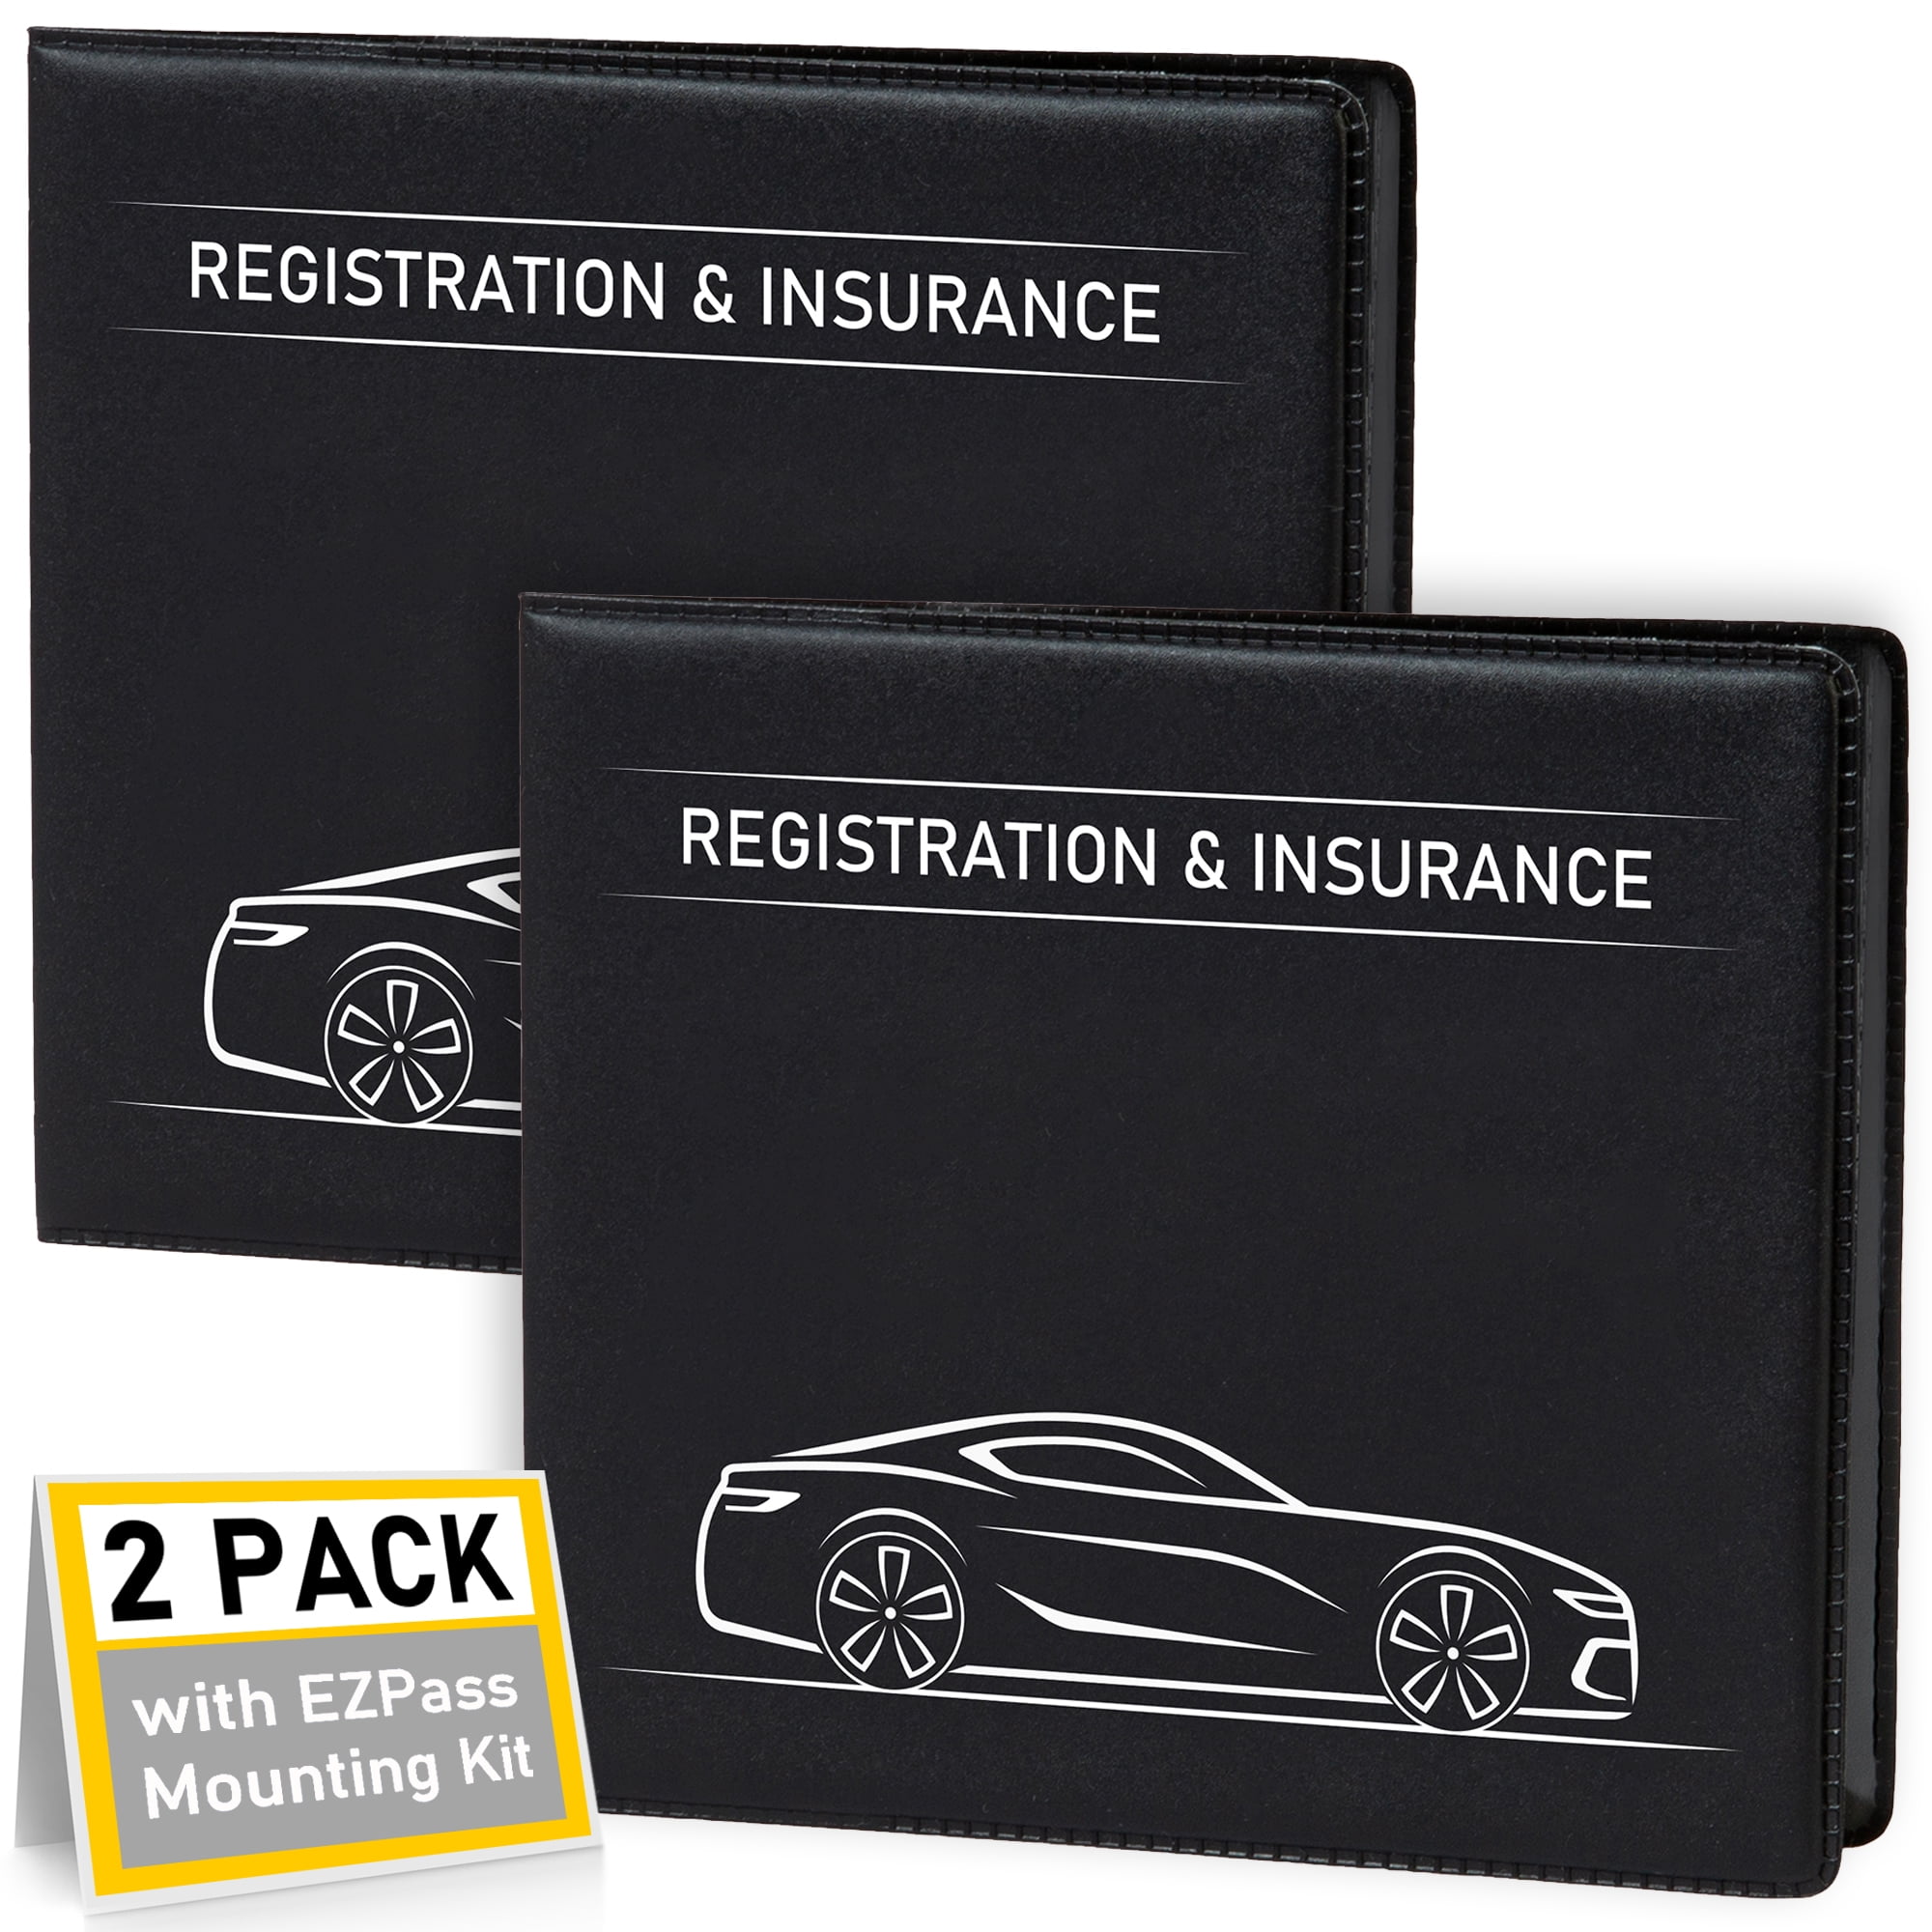 Made of Premium Black PU Leather-Include 0.7 mm Pen Protected and Within Arm’s Reach Glovebox Organizer- Keep Your Important Documents Safe SHIMDU Car Registration Card and Insurance Holder 